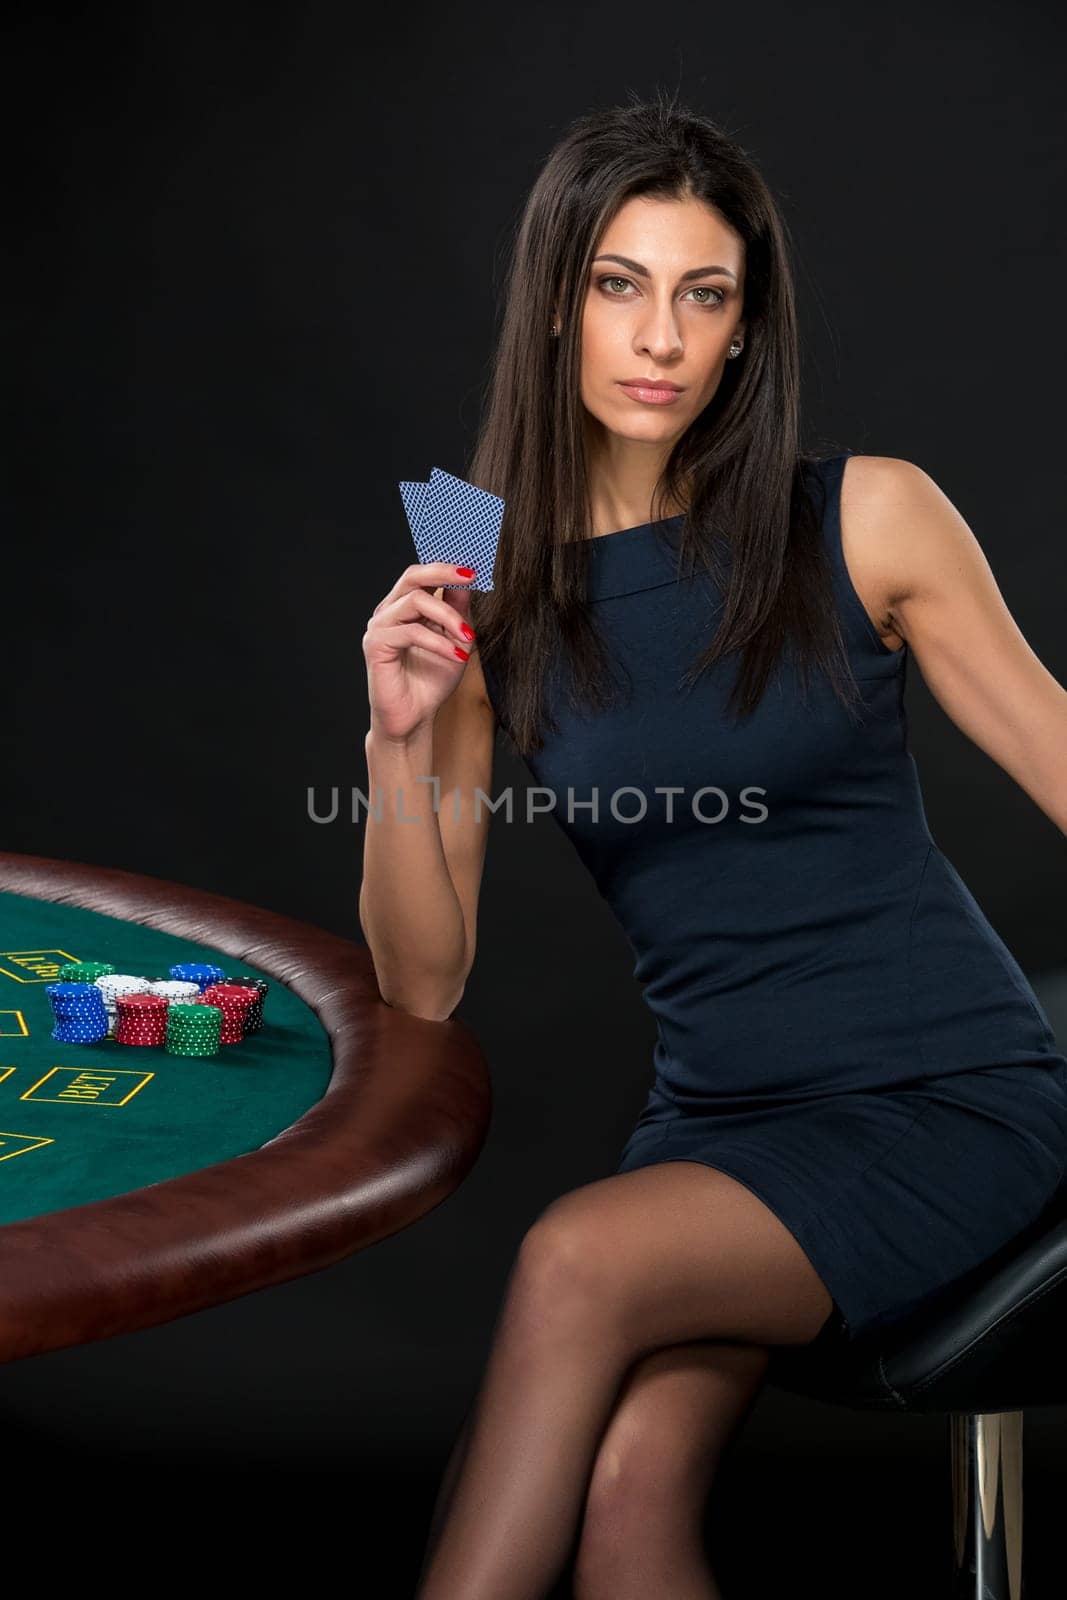 sexy woman with poker cards and chips. Female player in a beautiful black dress